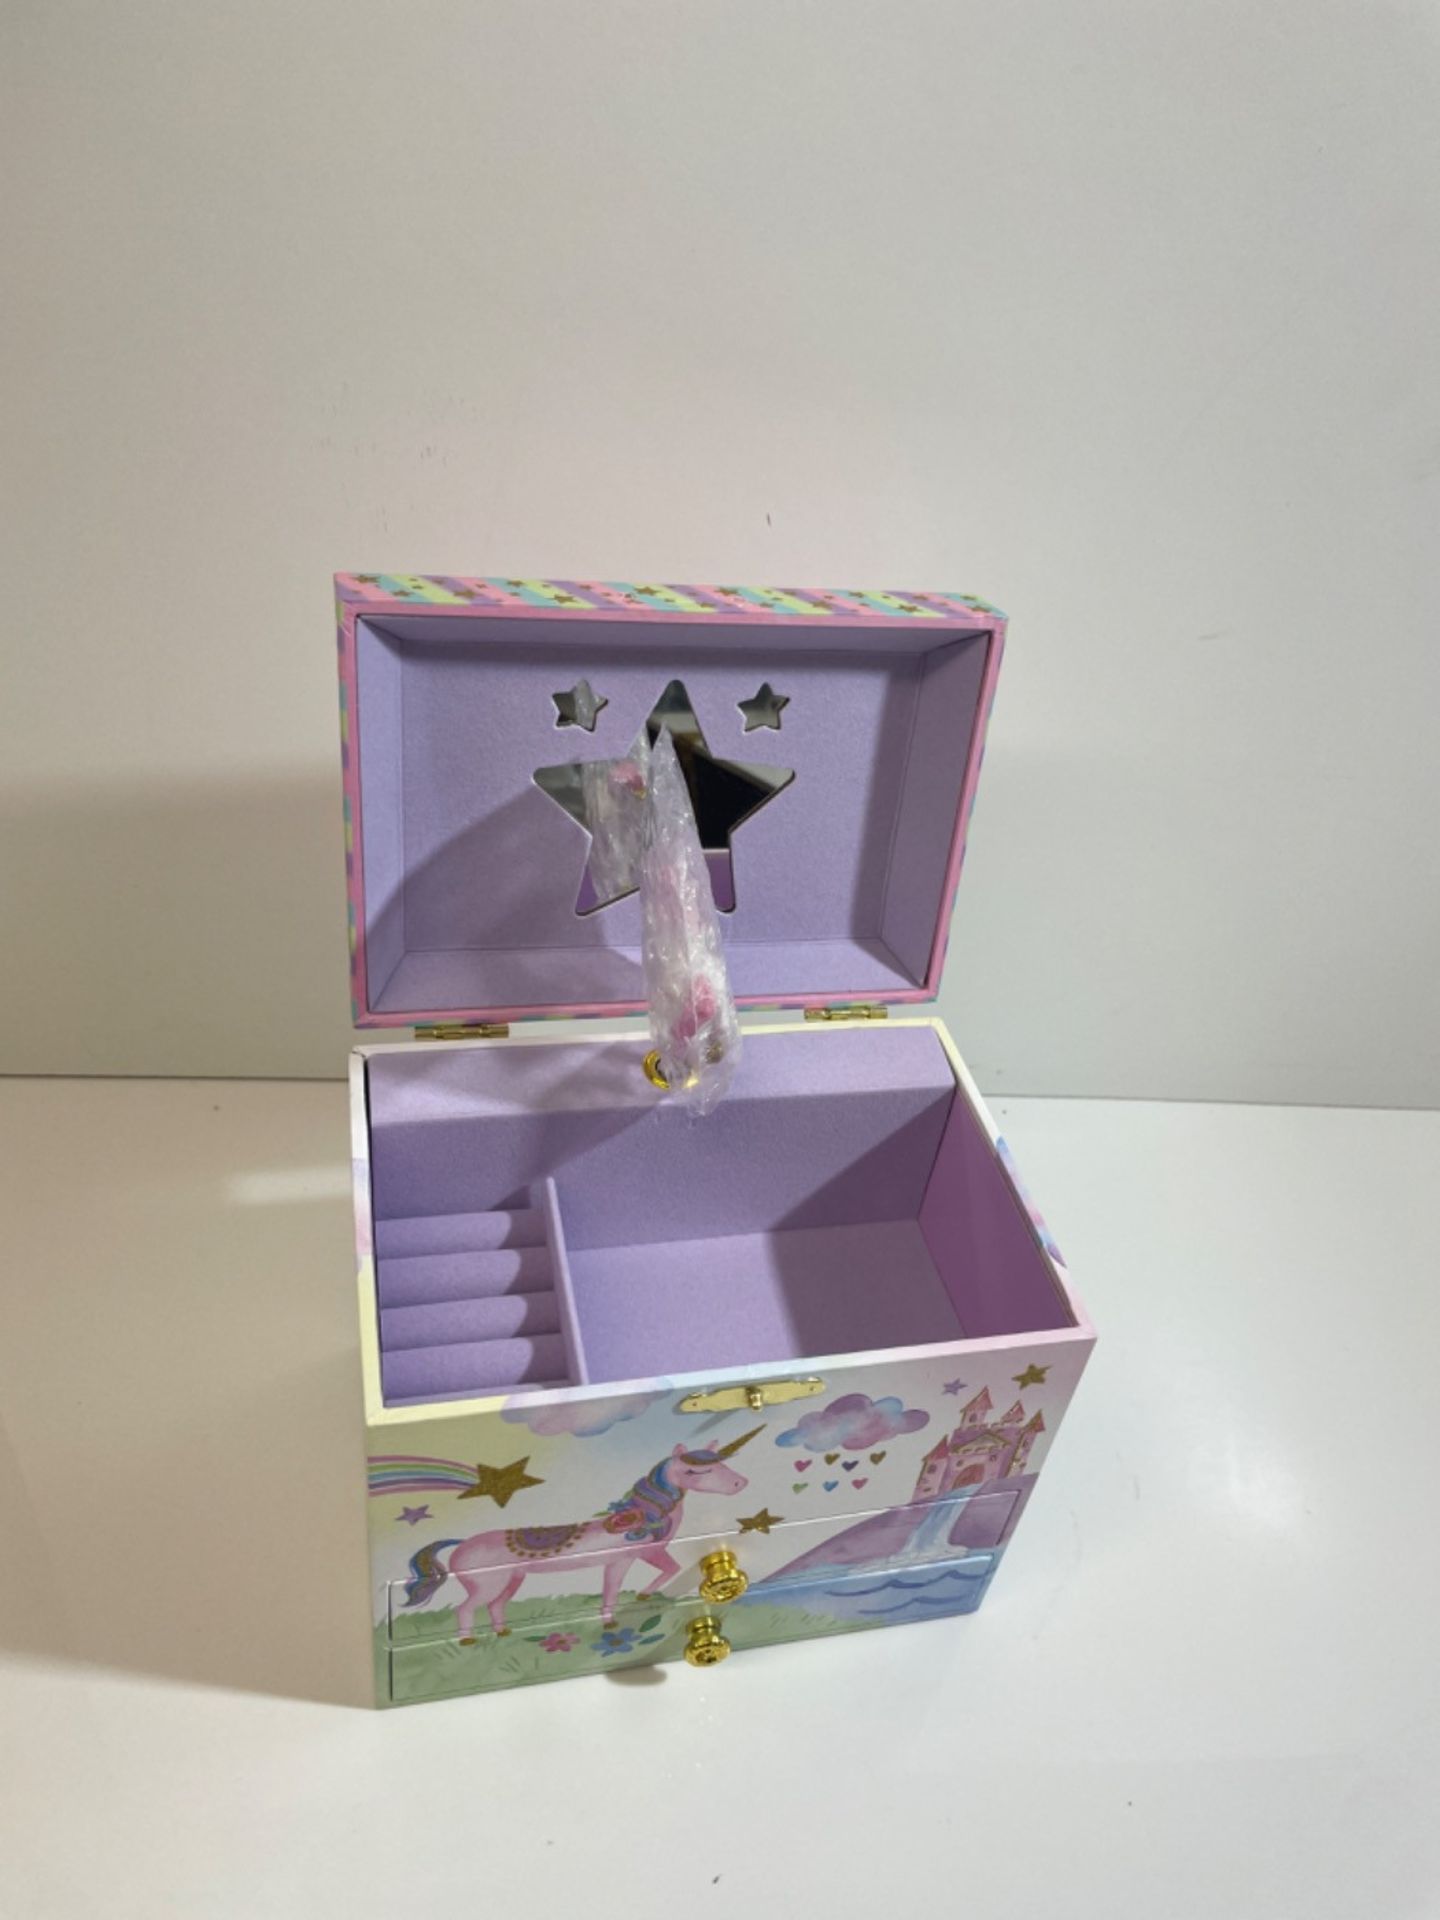 Jewelkeeper Unicorn Jewellery Box for Girls with 2 Pull-out Drawers, Glitter Rainbow and Stars Unic - Image 2 of 3